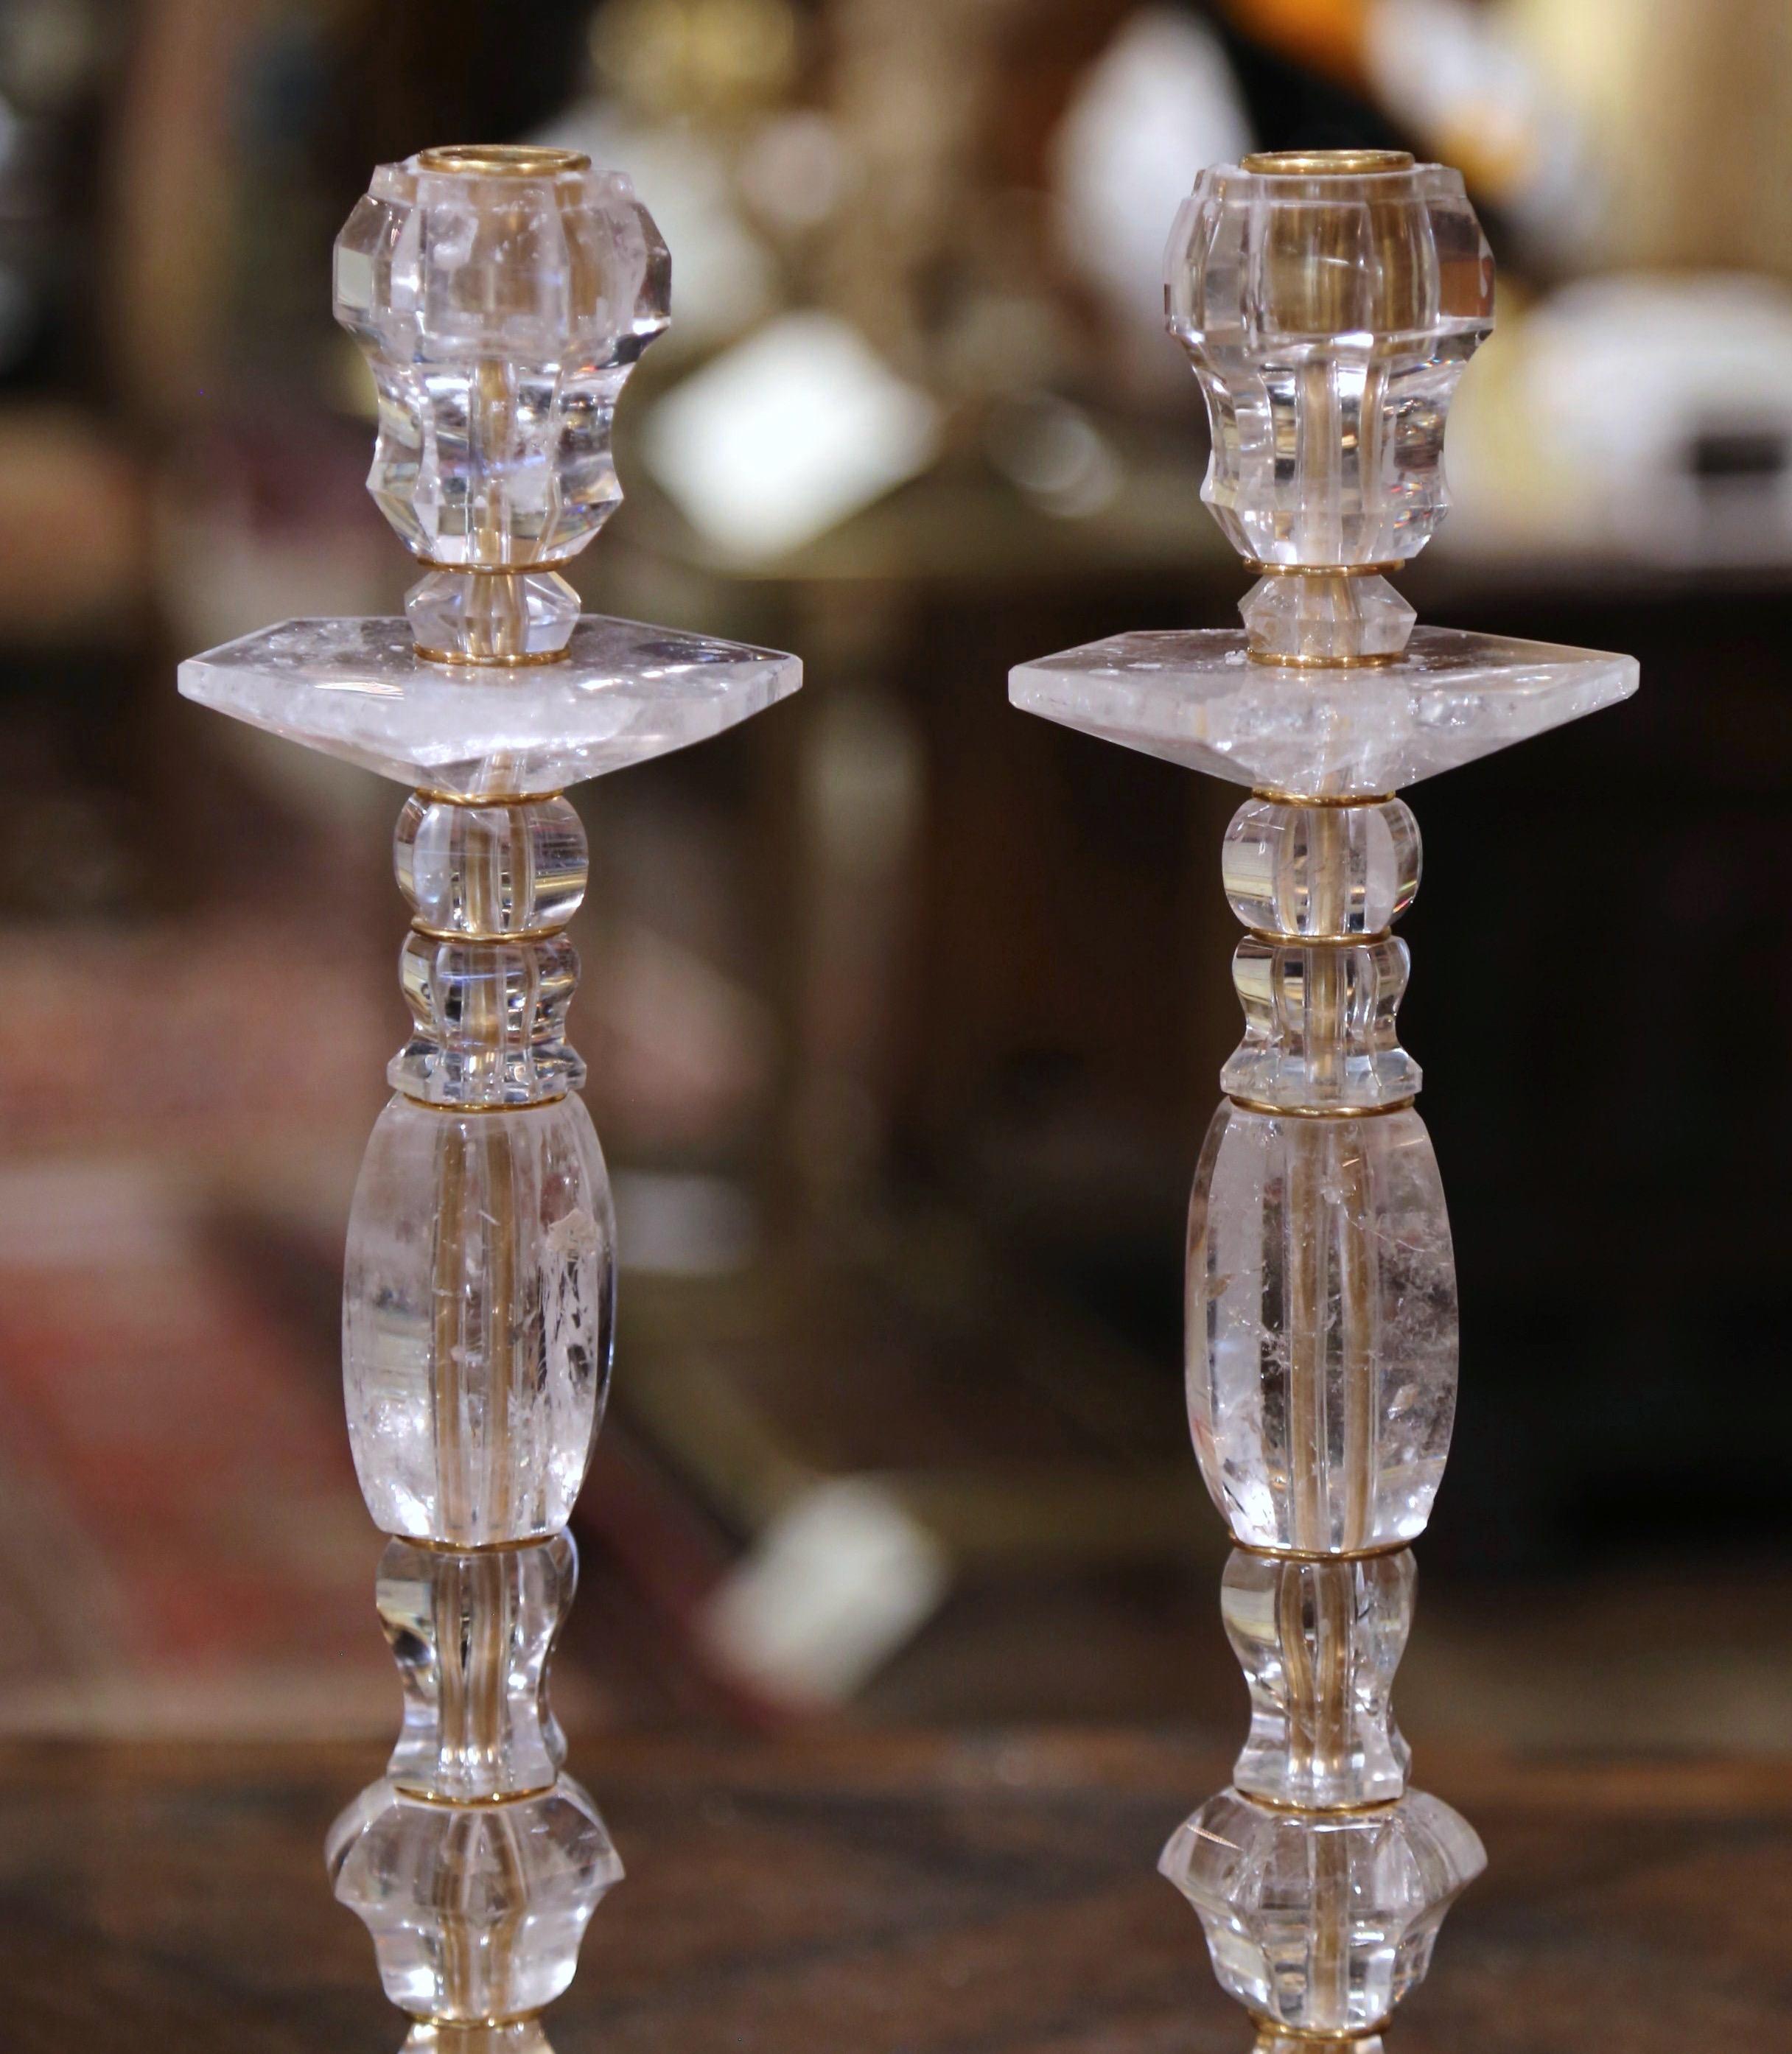 These elegant rock crystal candlesticks were crafted in Italy. Each vintage candleholder sits on a sturdy octagonal brass base dressed with eight ball feet, and features exquisite craftsmanship throughout. The candlesticks have a carved tapered and